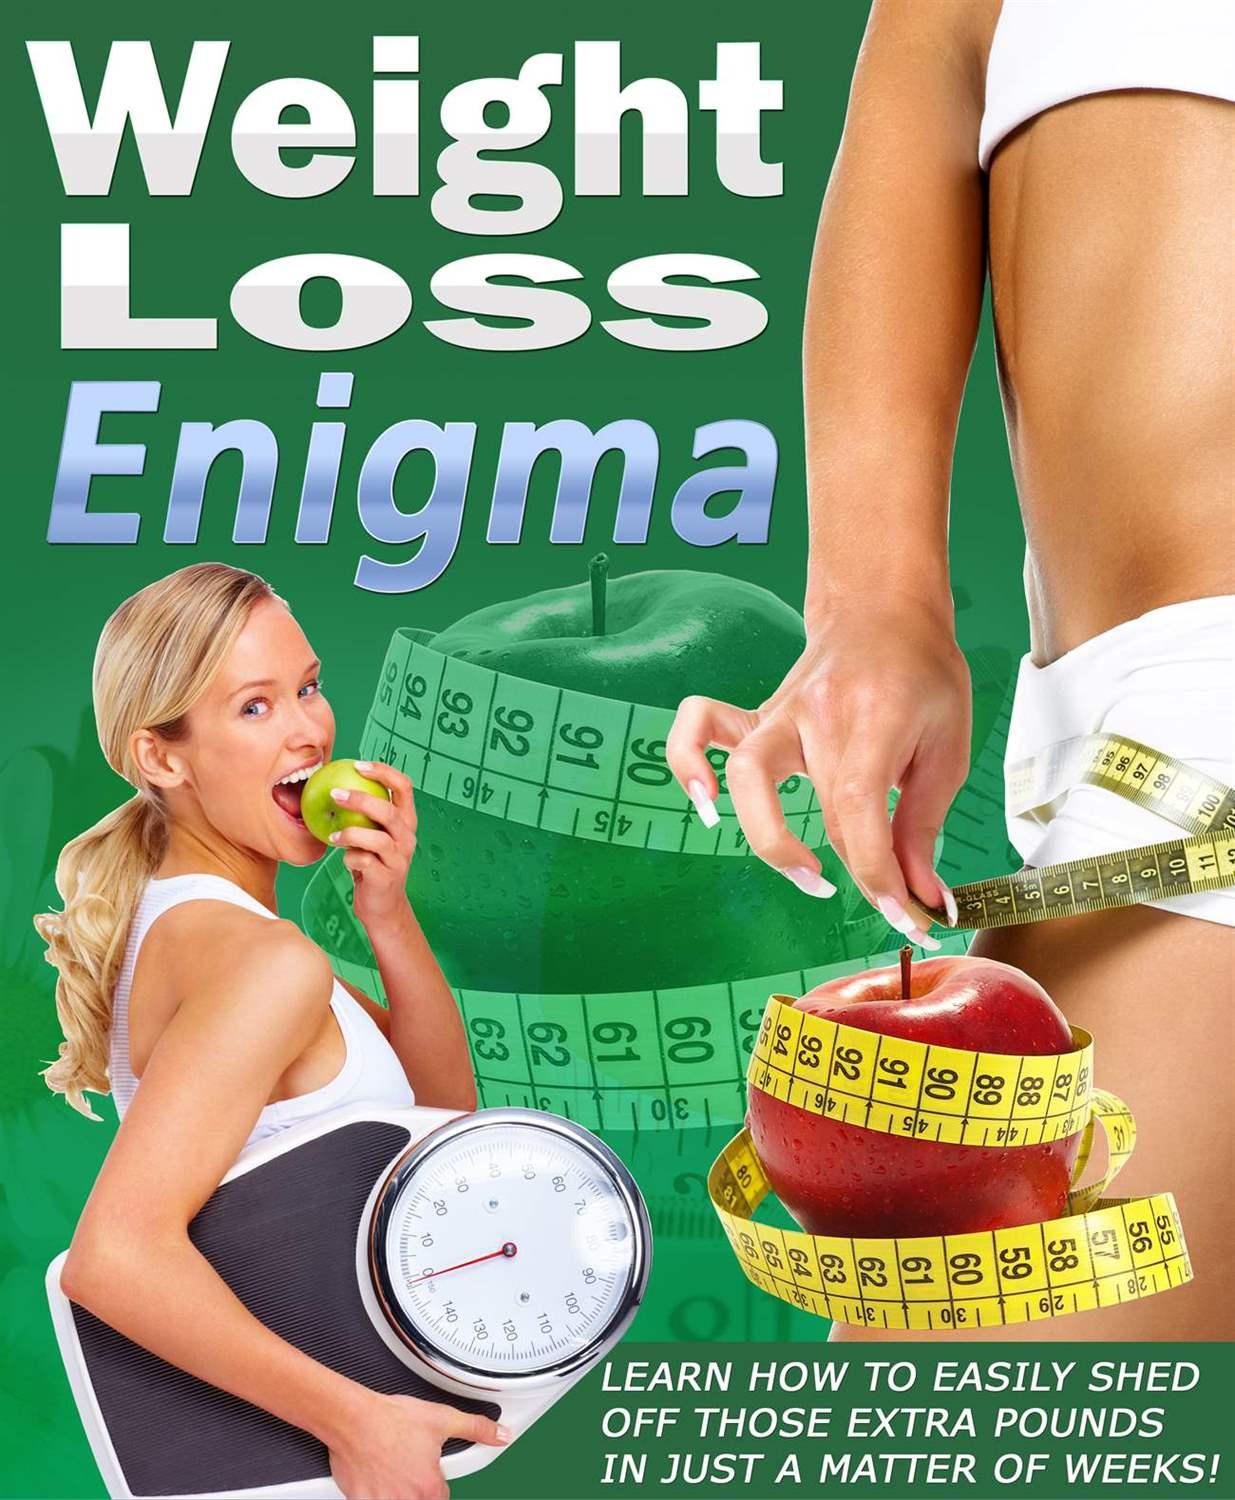 Weight Loss Enigma - PDF Ebook and Resale website Bundle - INCLUDES WORDPRESS PLUGINS AND TEMPLATES